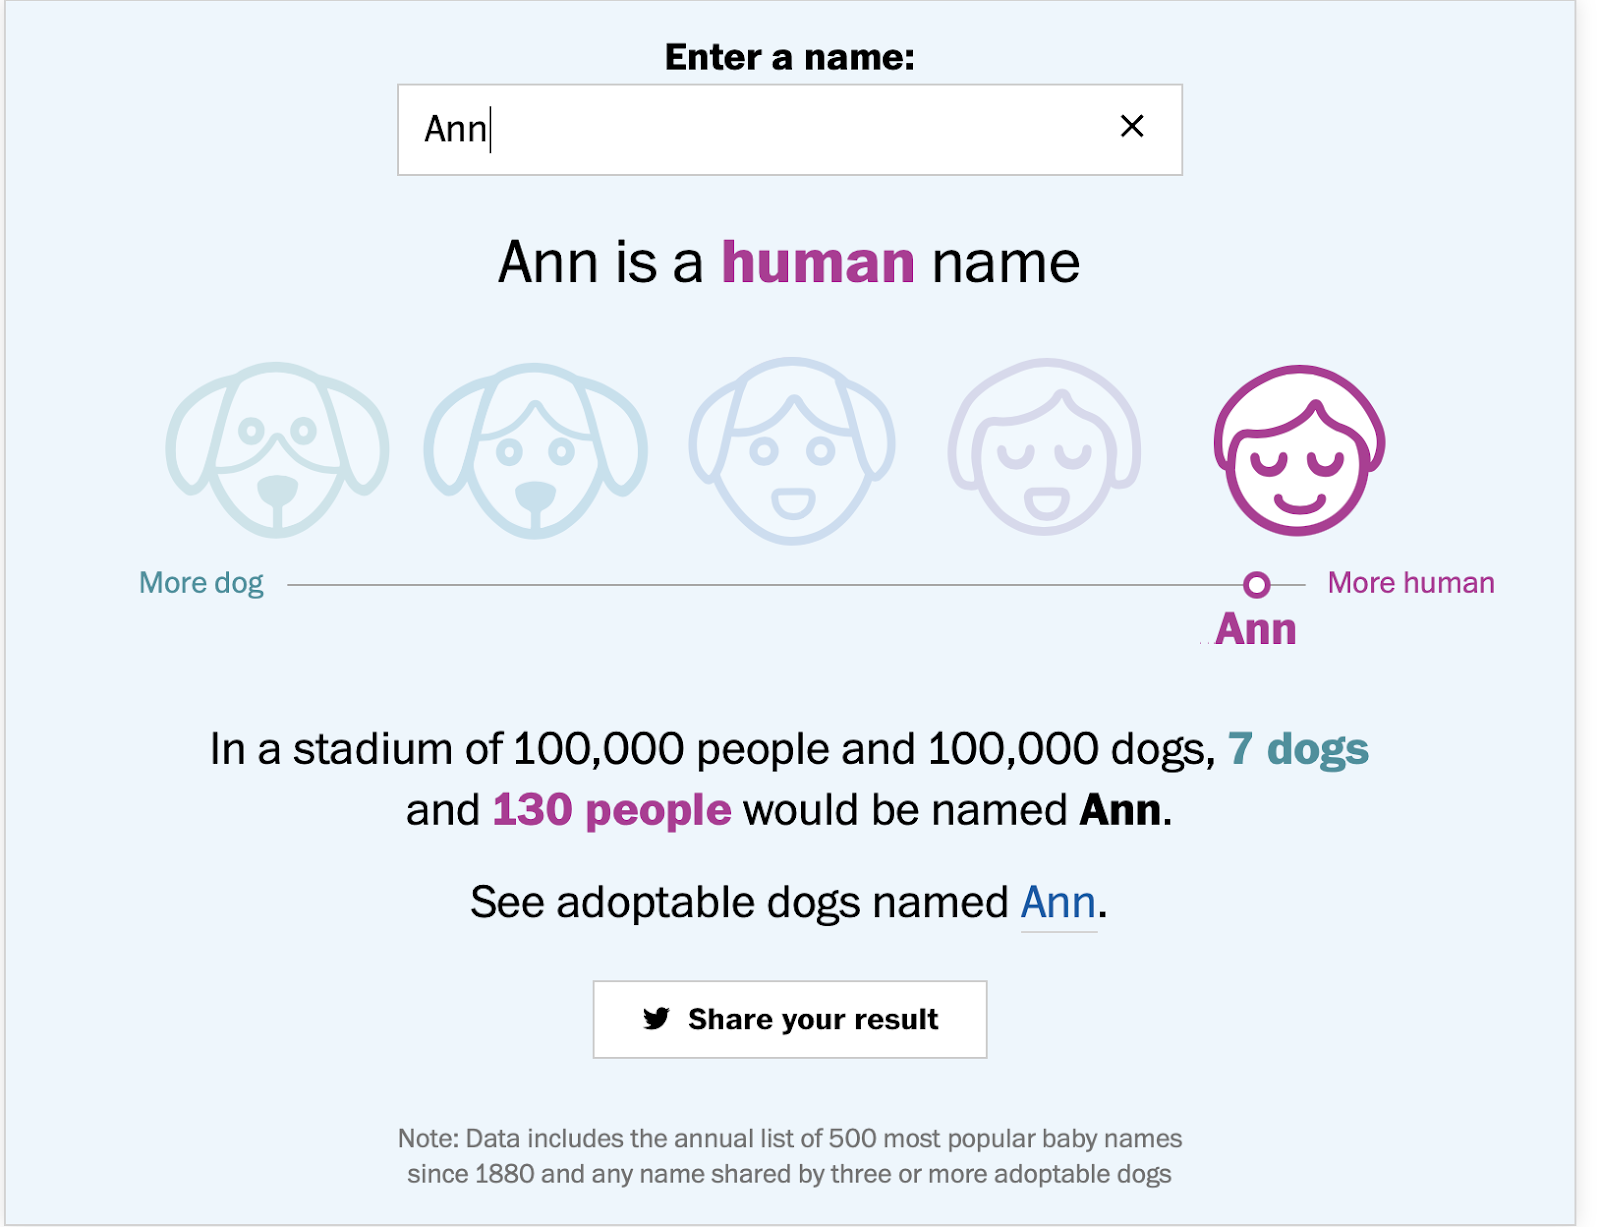 Do you have a name that many people name their dogs?